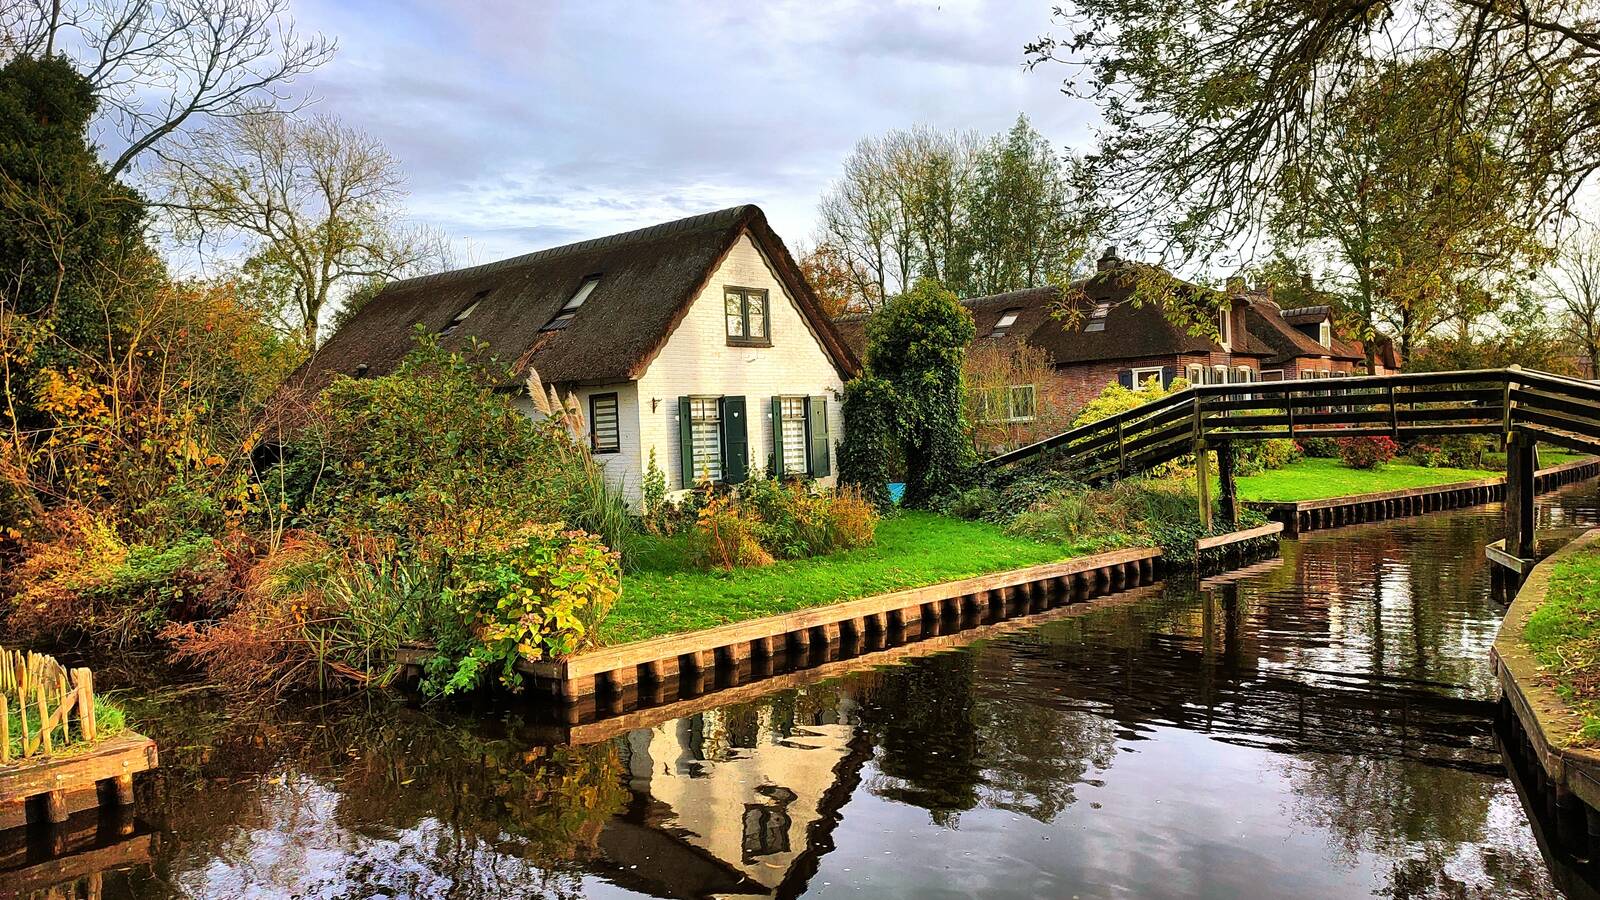 Image of Giethoorn Village by David Lally